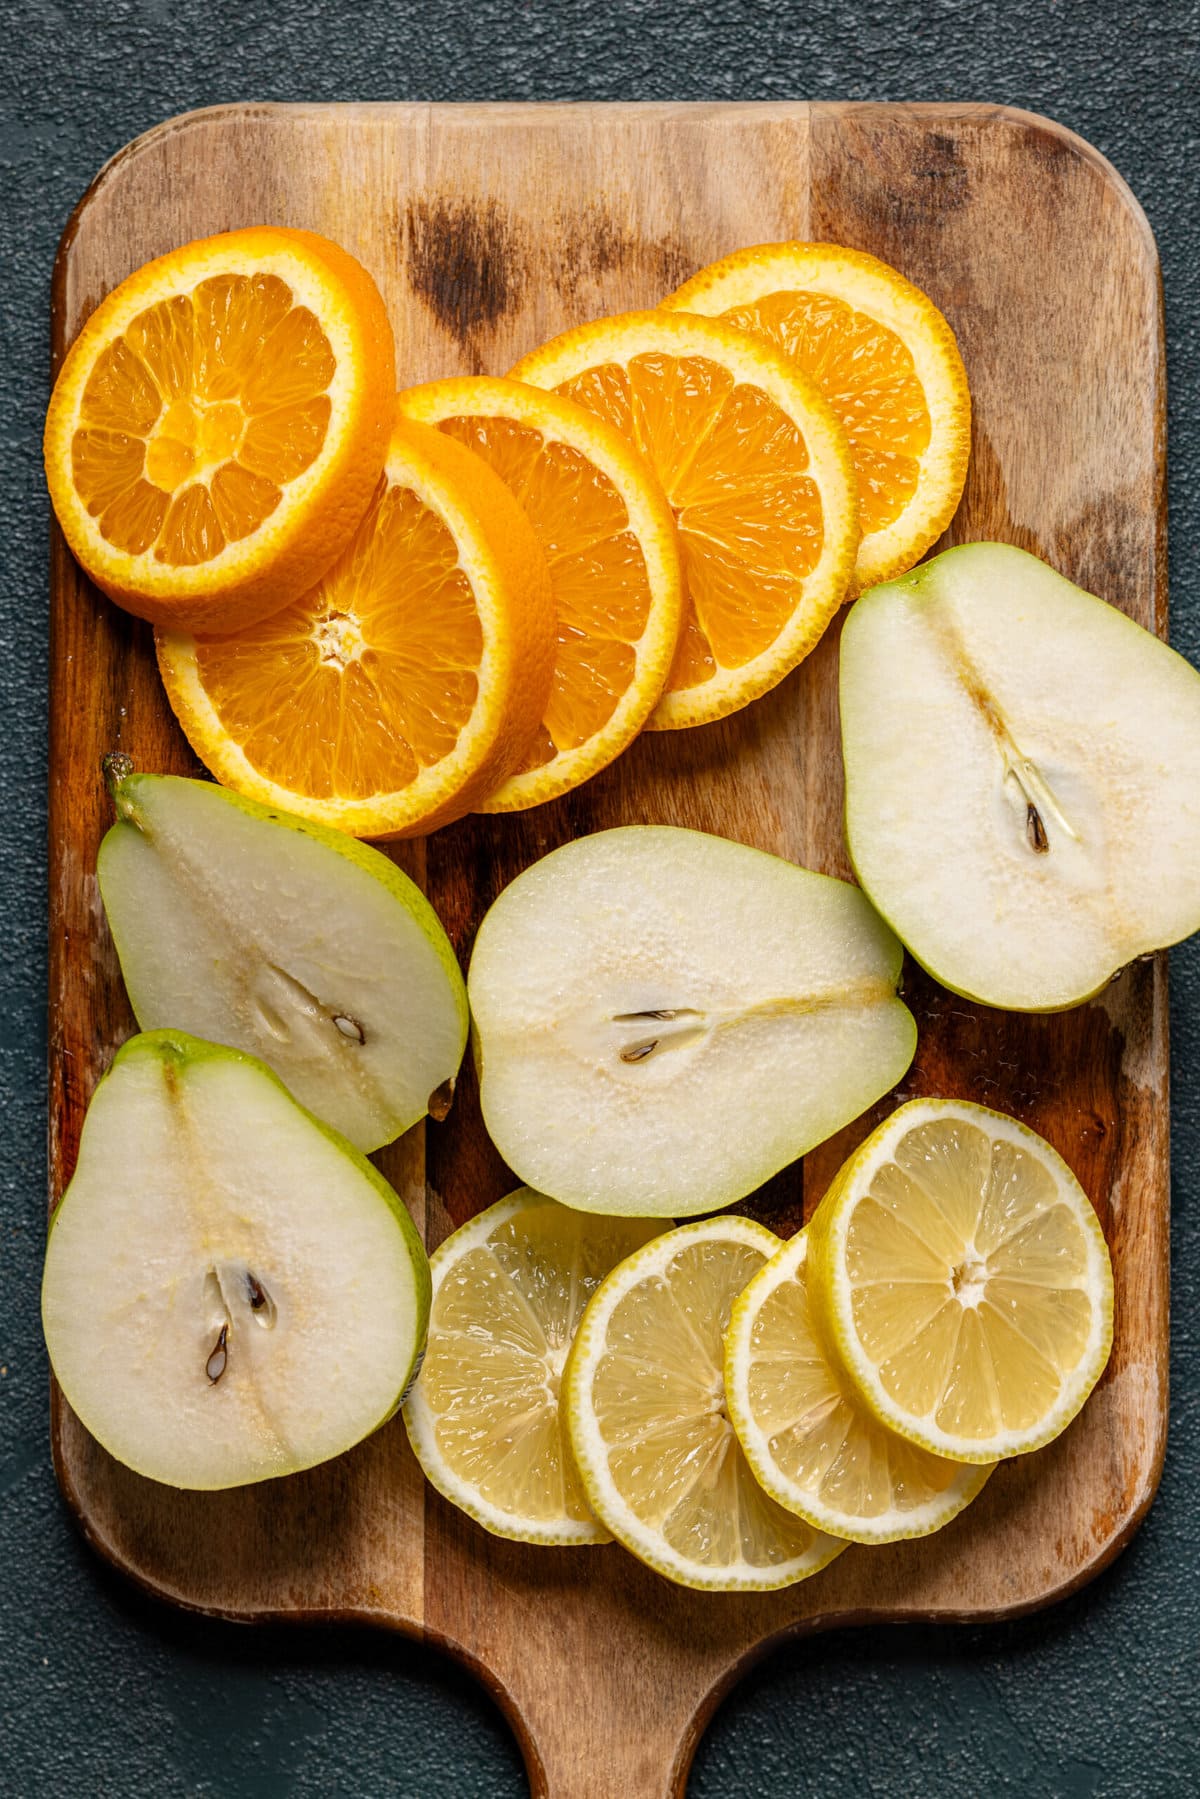 Sliced oranges, lemon, and pears on a cutting board.